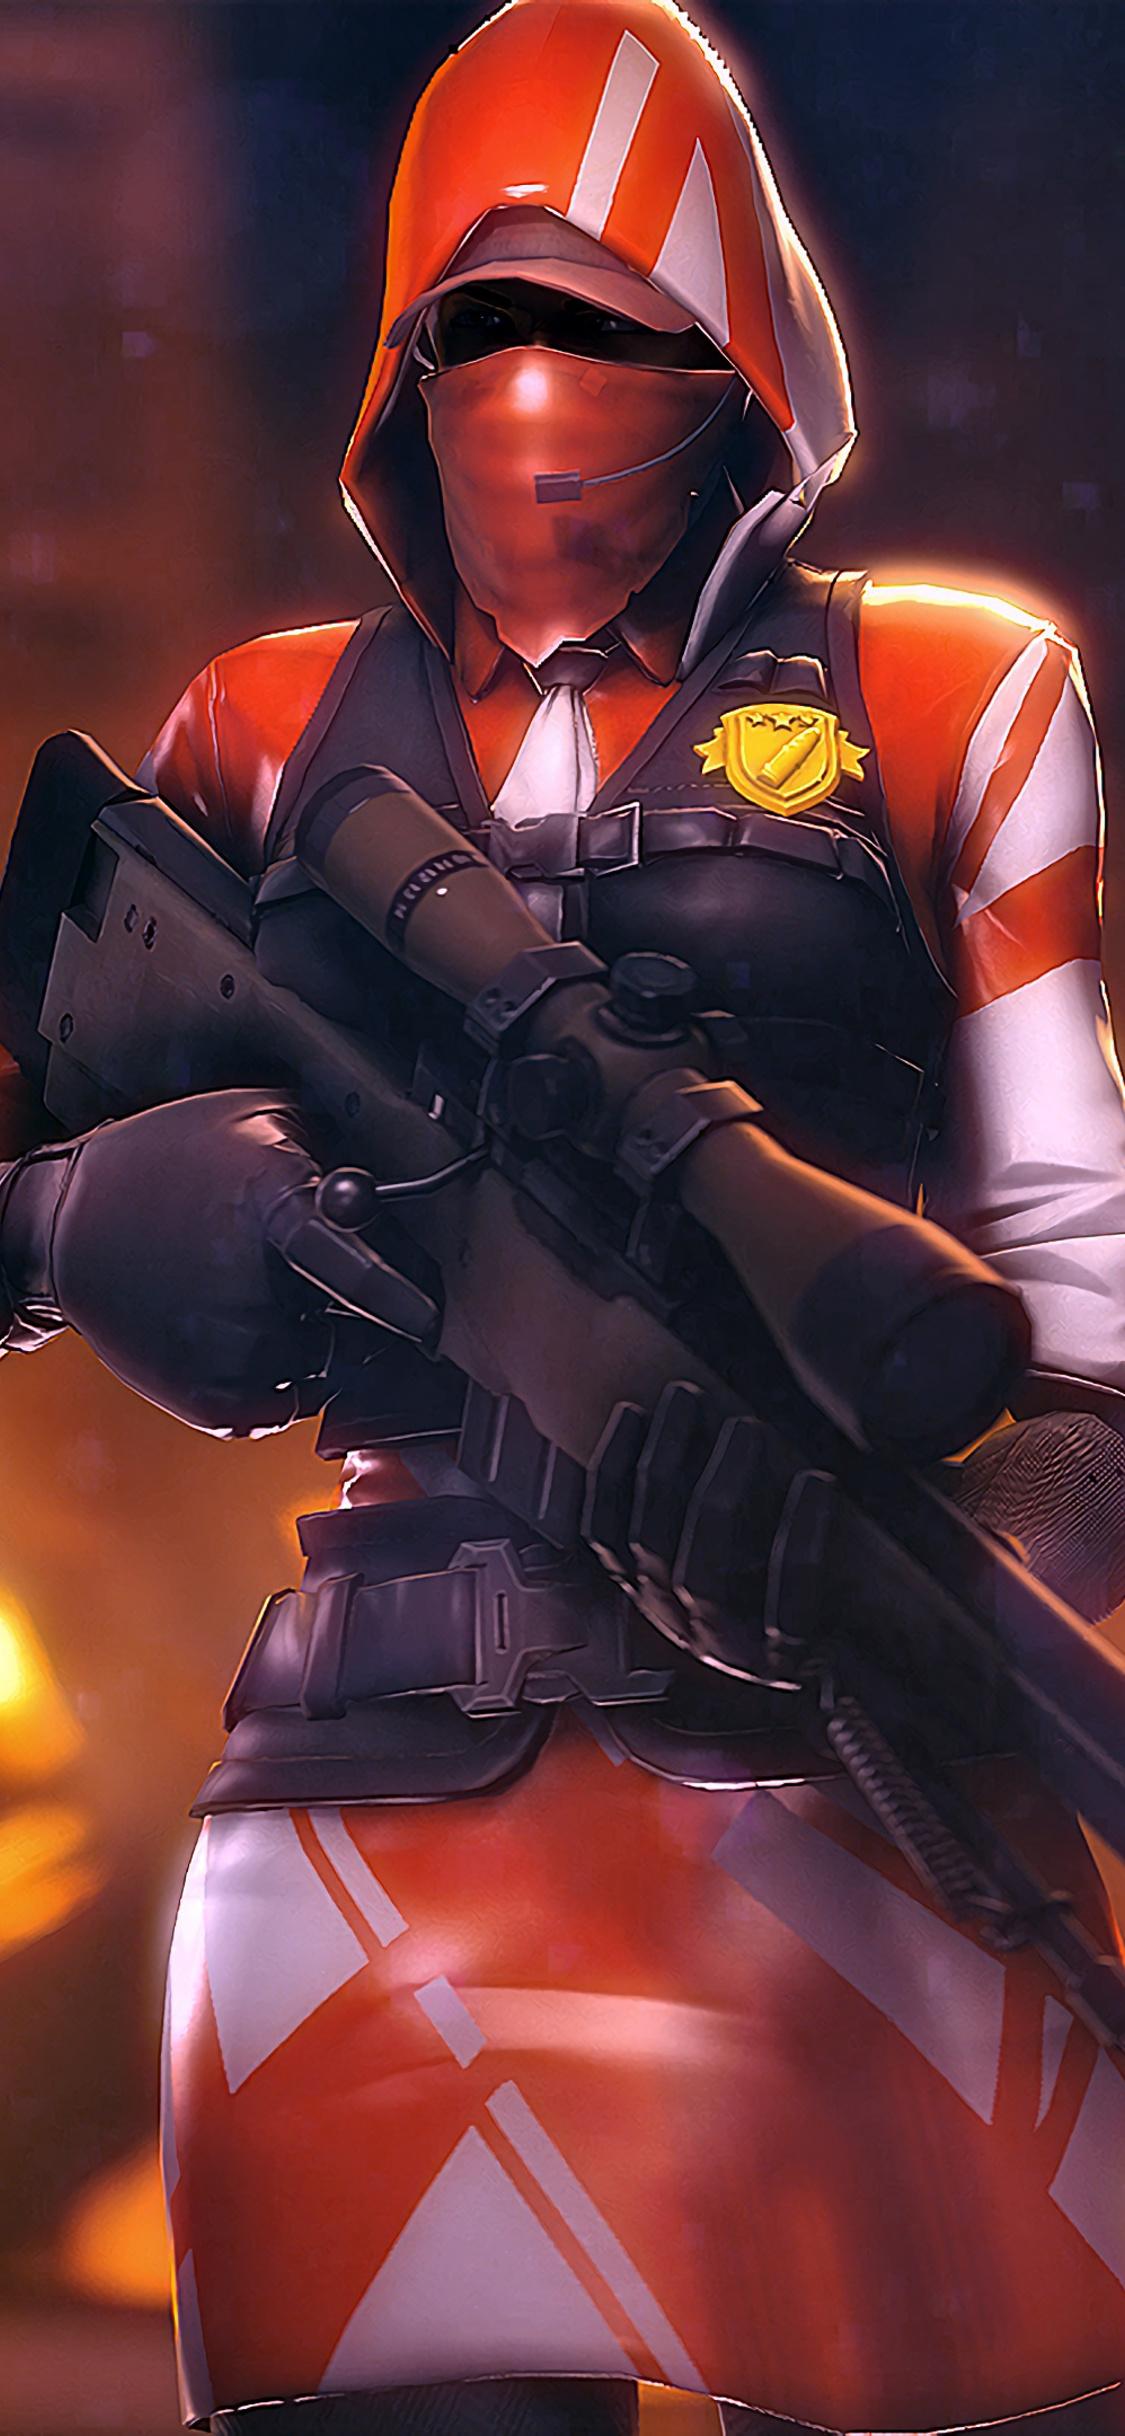 Ace Sniper Outfit Fortnite iPhone Background Wallpaper and Free